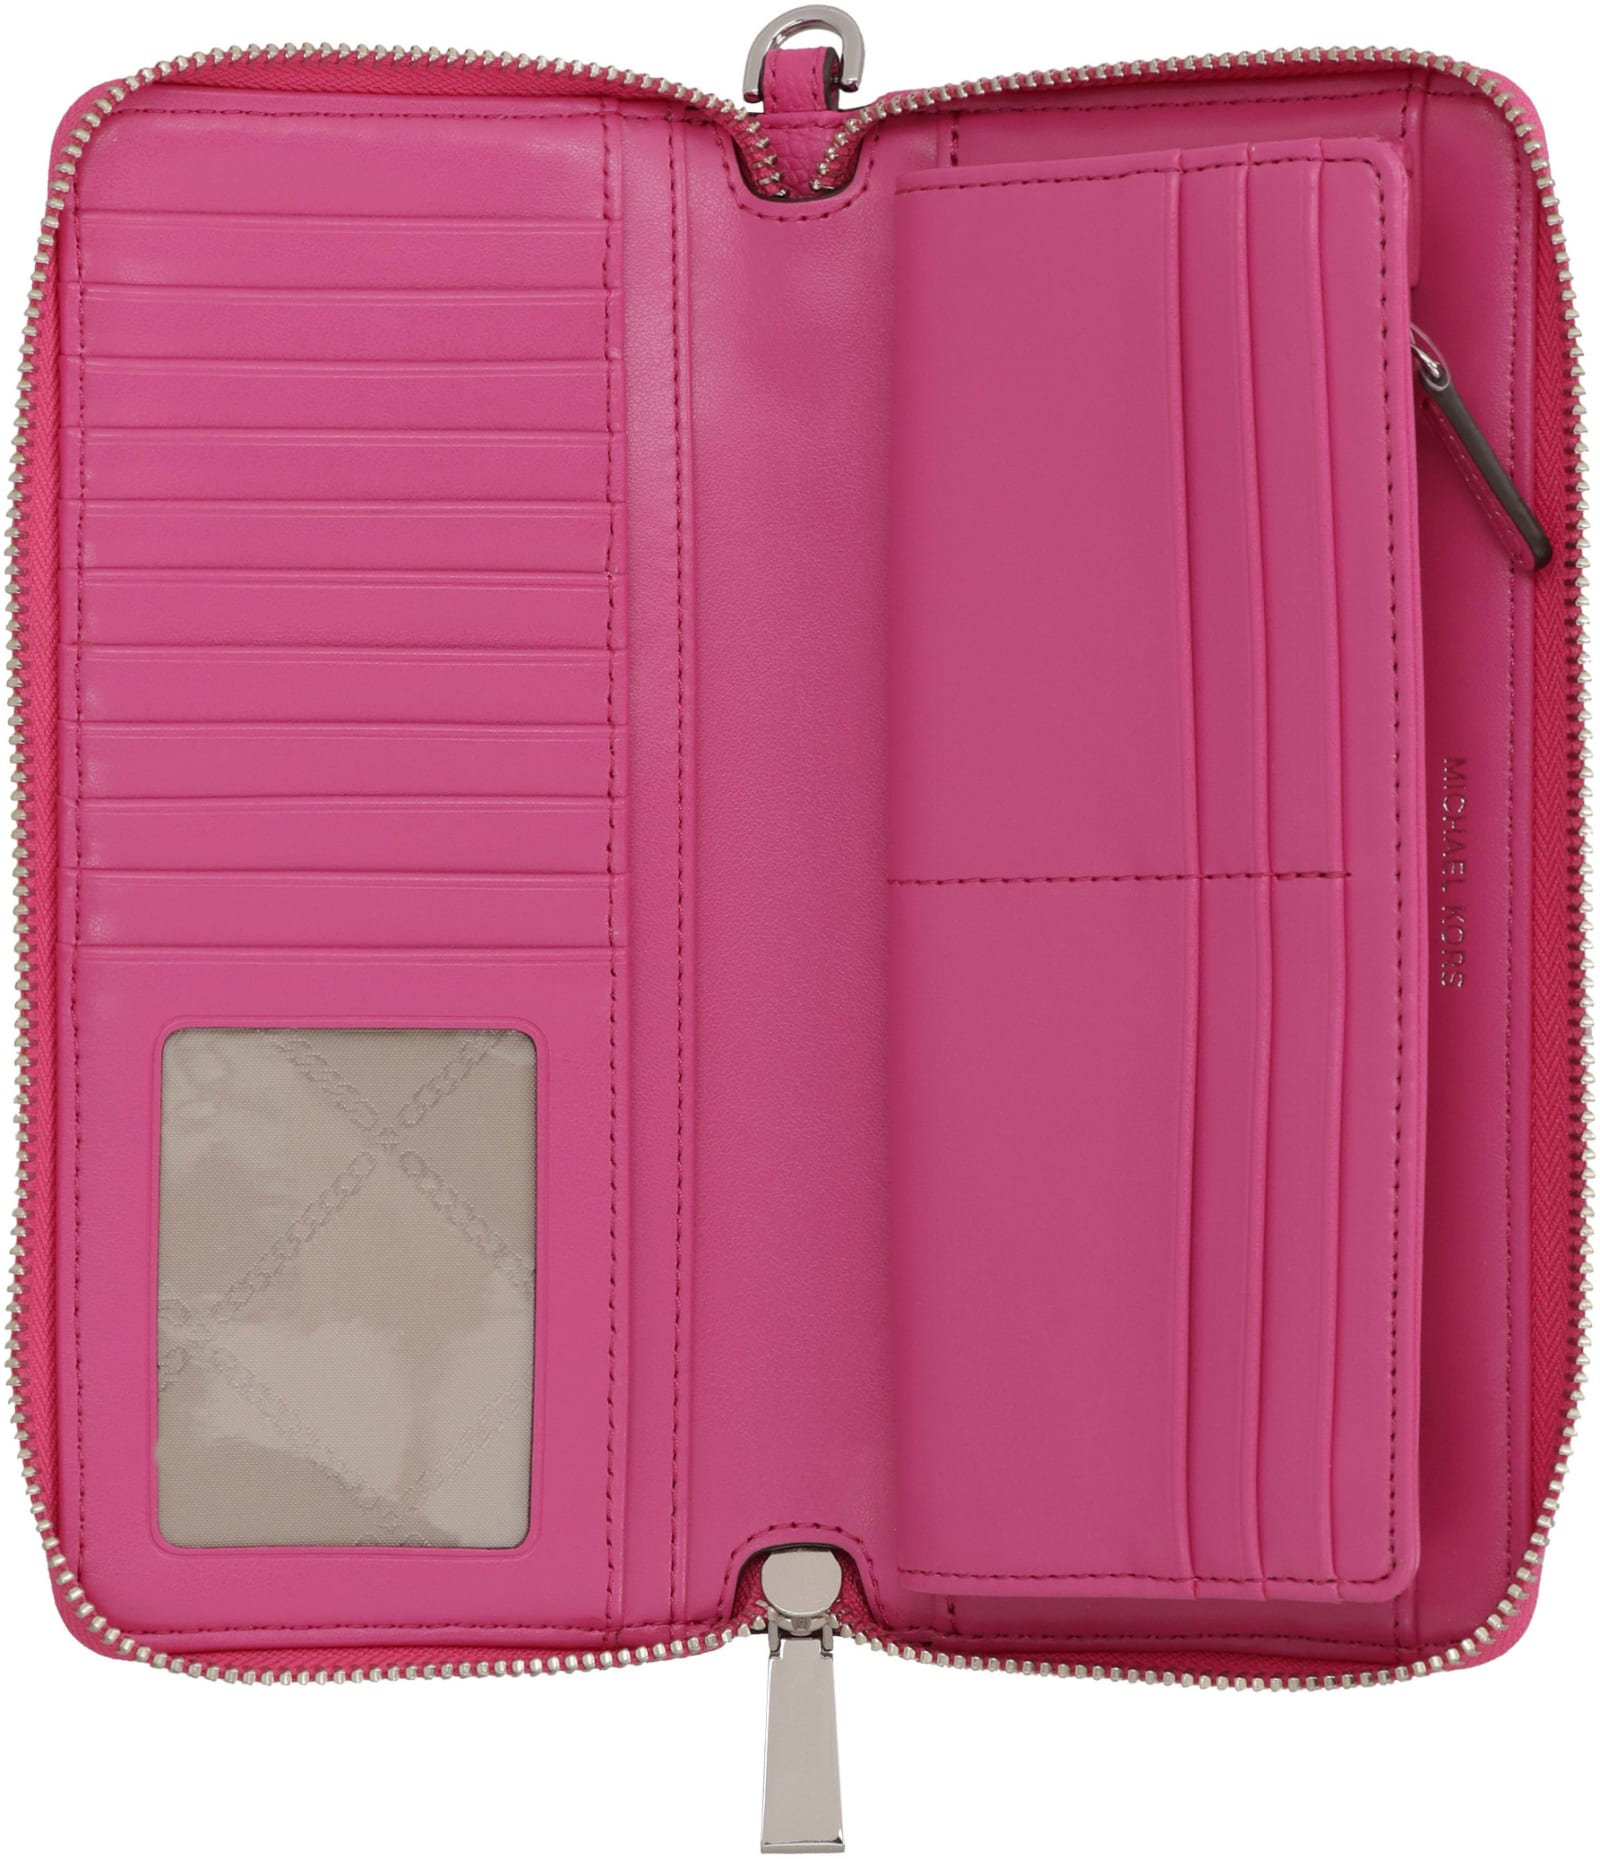 Jet set leather wallet Michael Kors Pink in Leather - 21097042